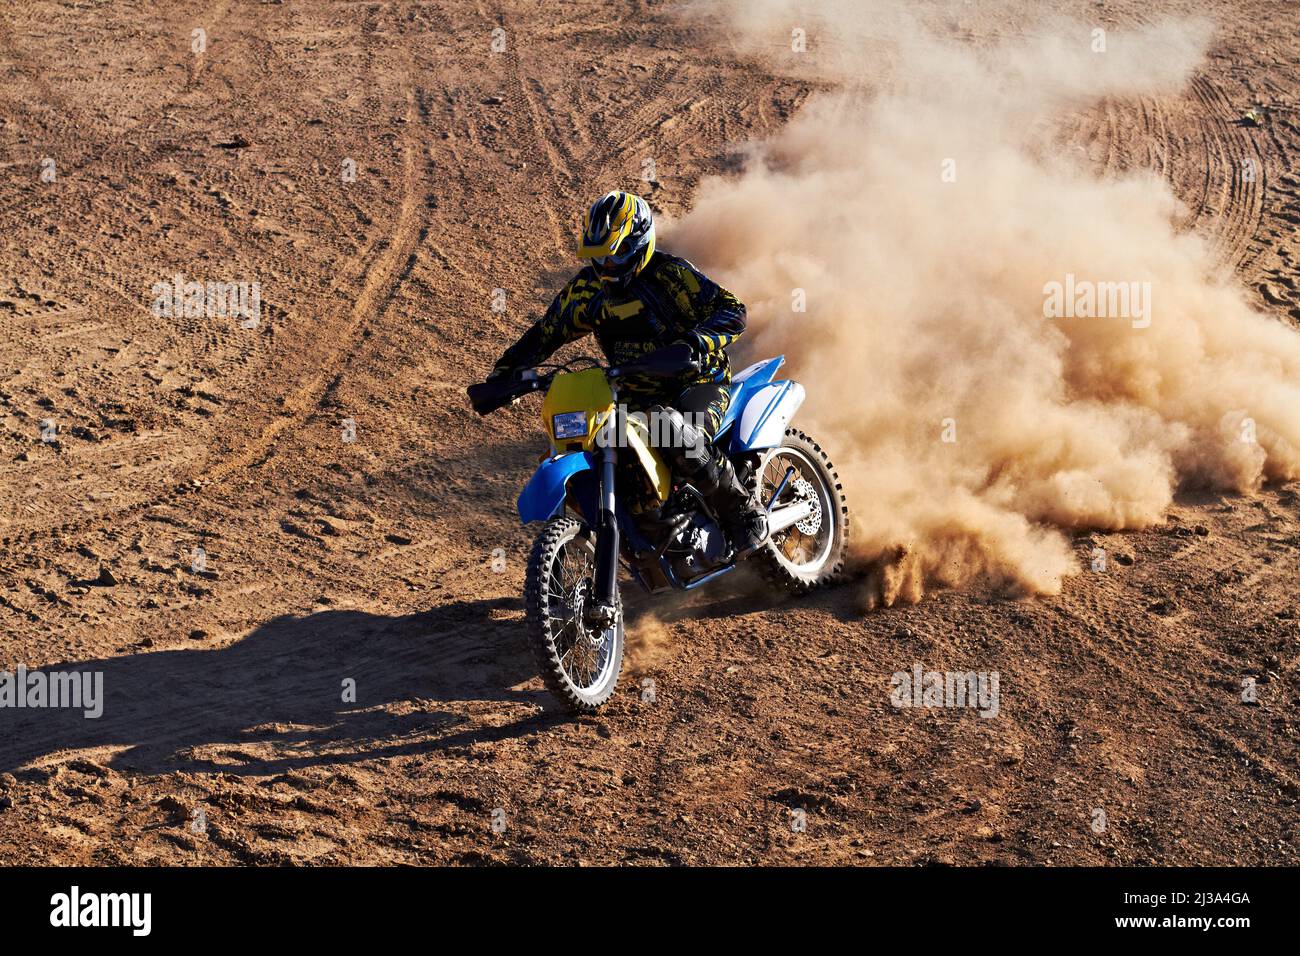 Ready for racing adventure. Shot of dirtbike racers. Stock Photo